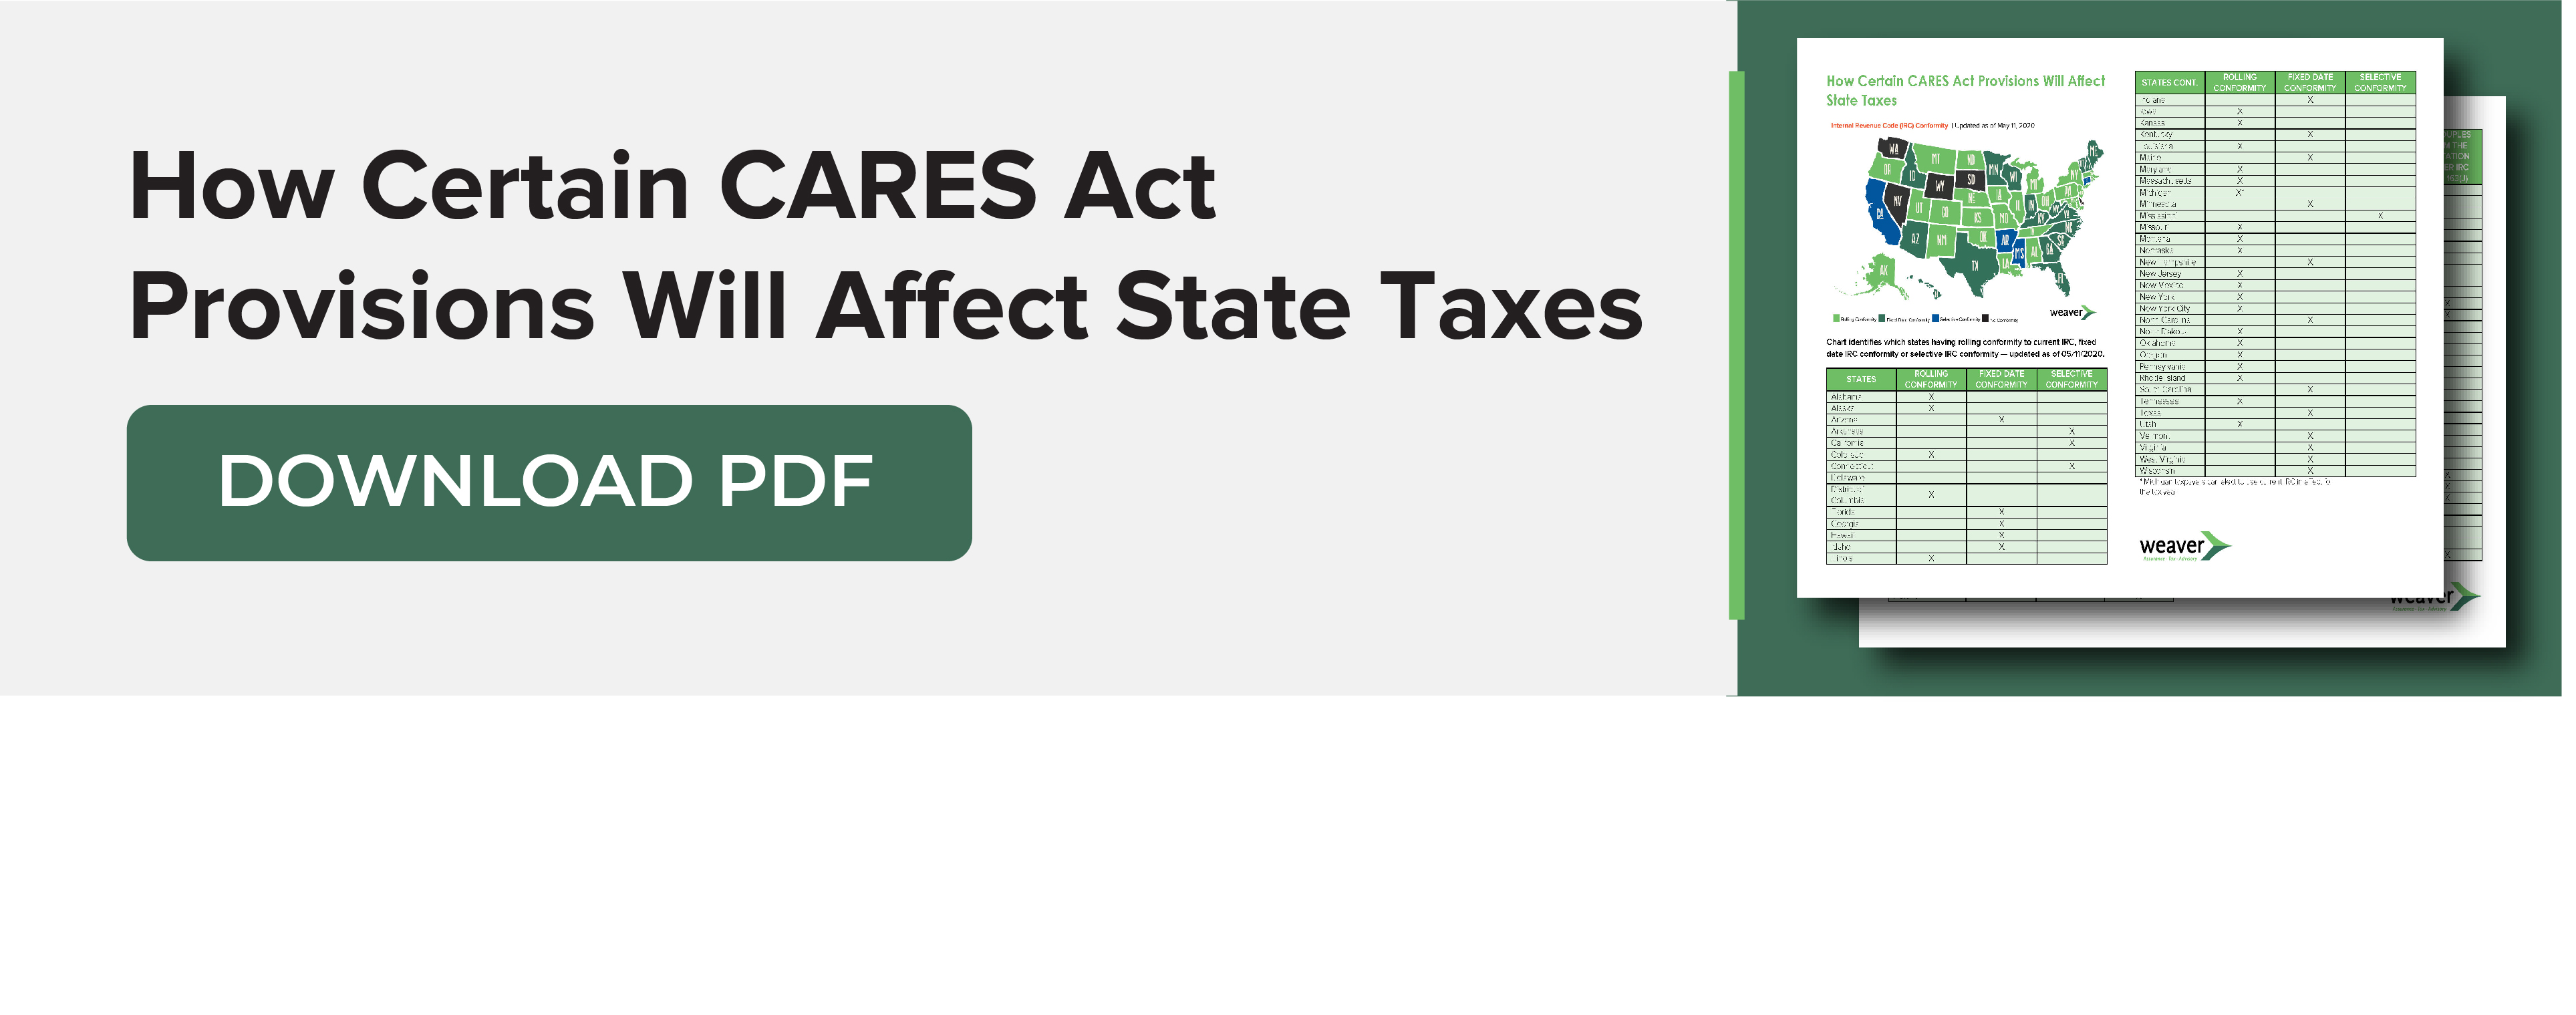 State Implications of CARES Act Download Button